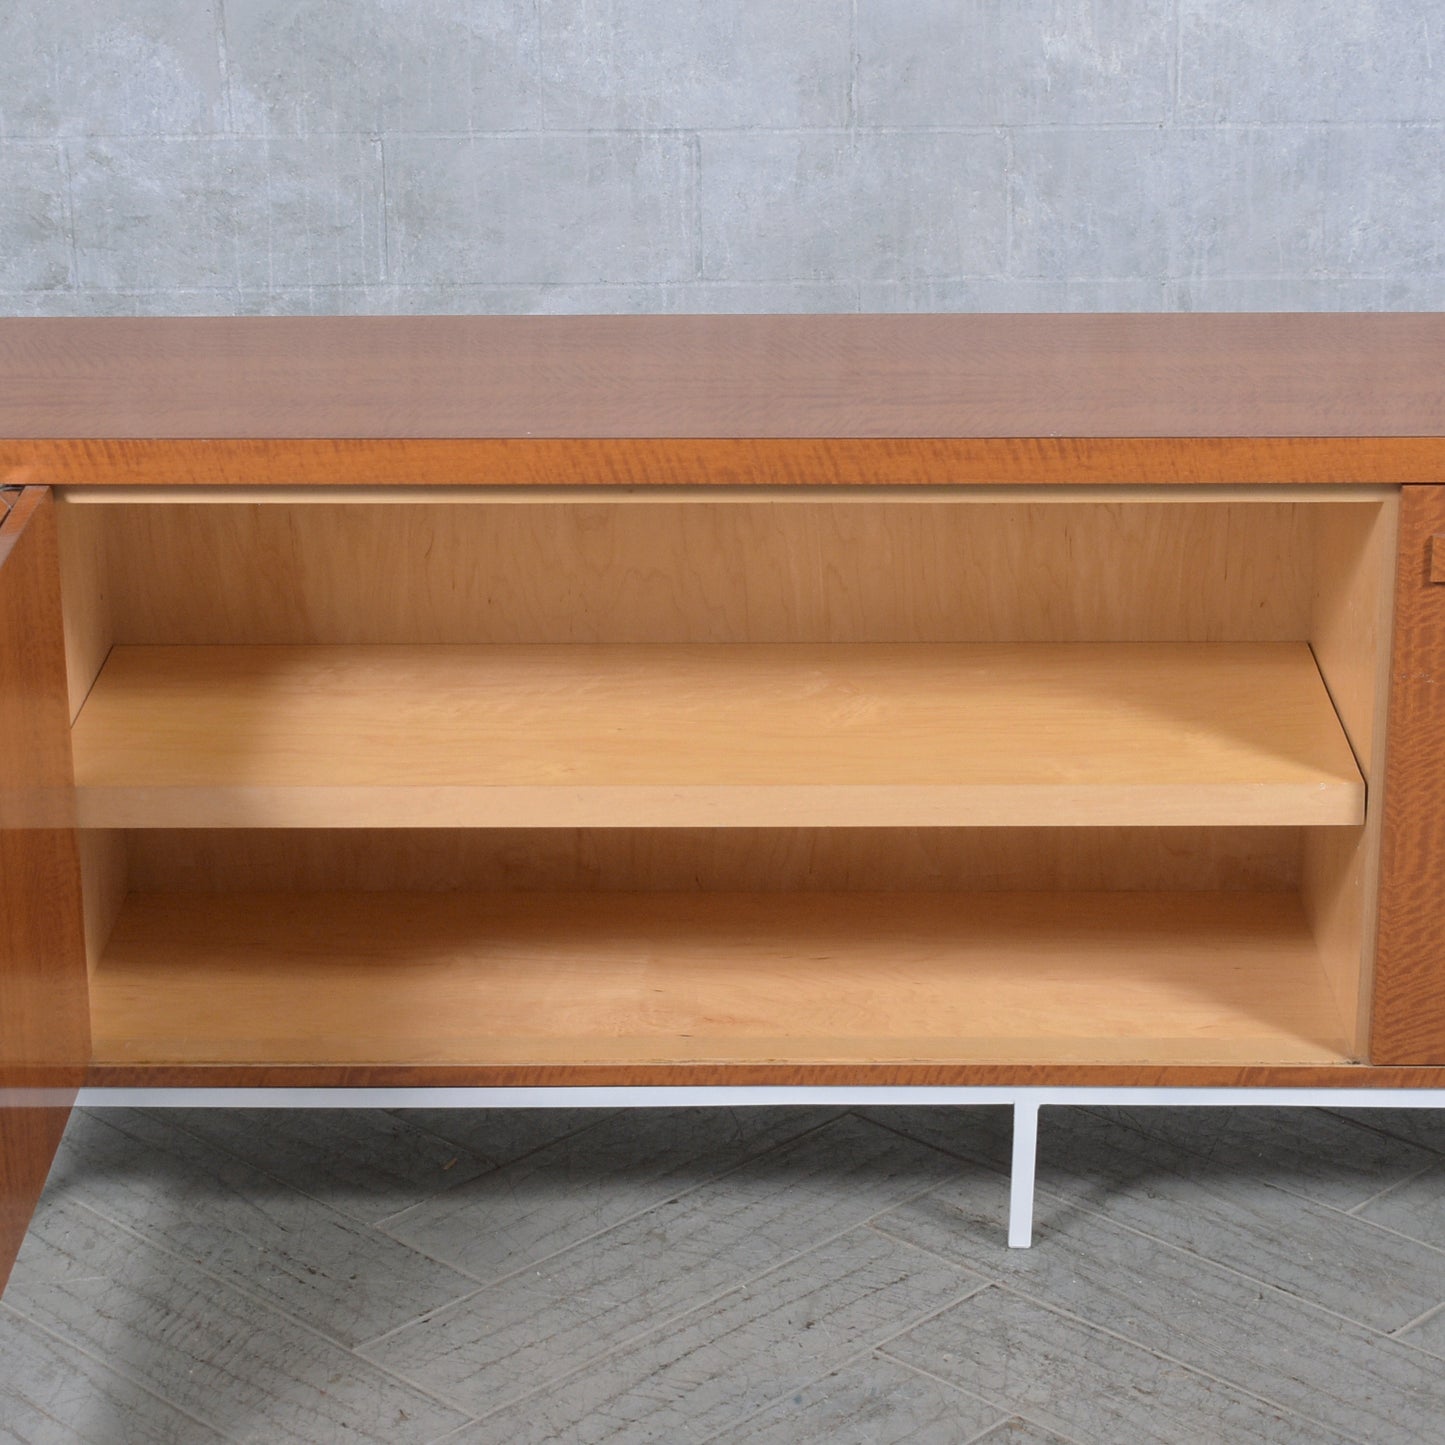 Modern Executive Tiger Oak Credenza: Sophisticated Design Meets Functionality